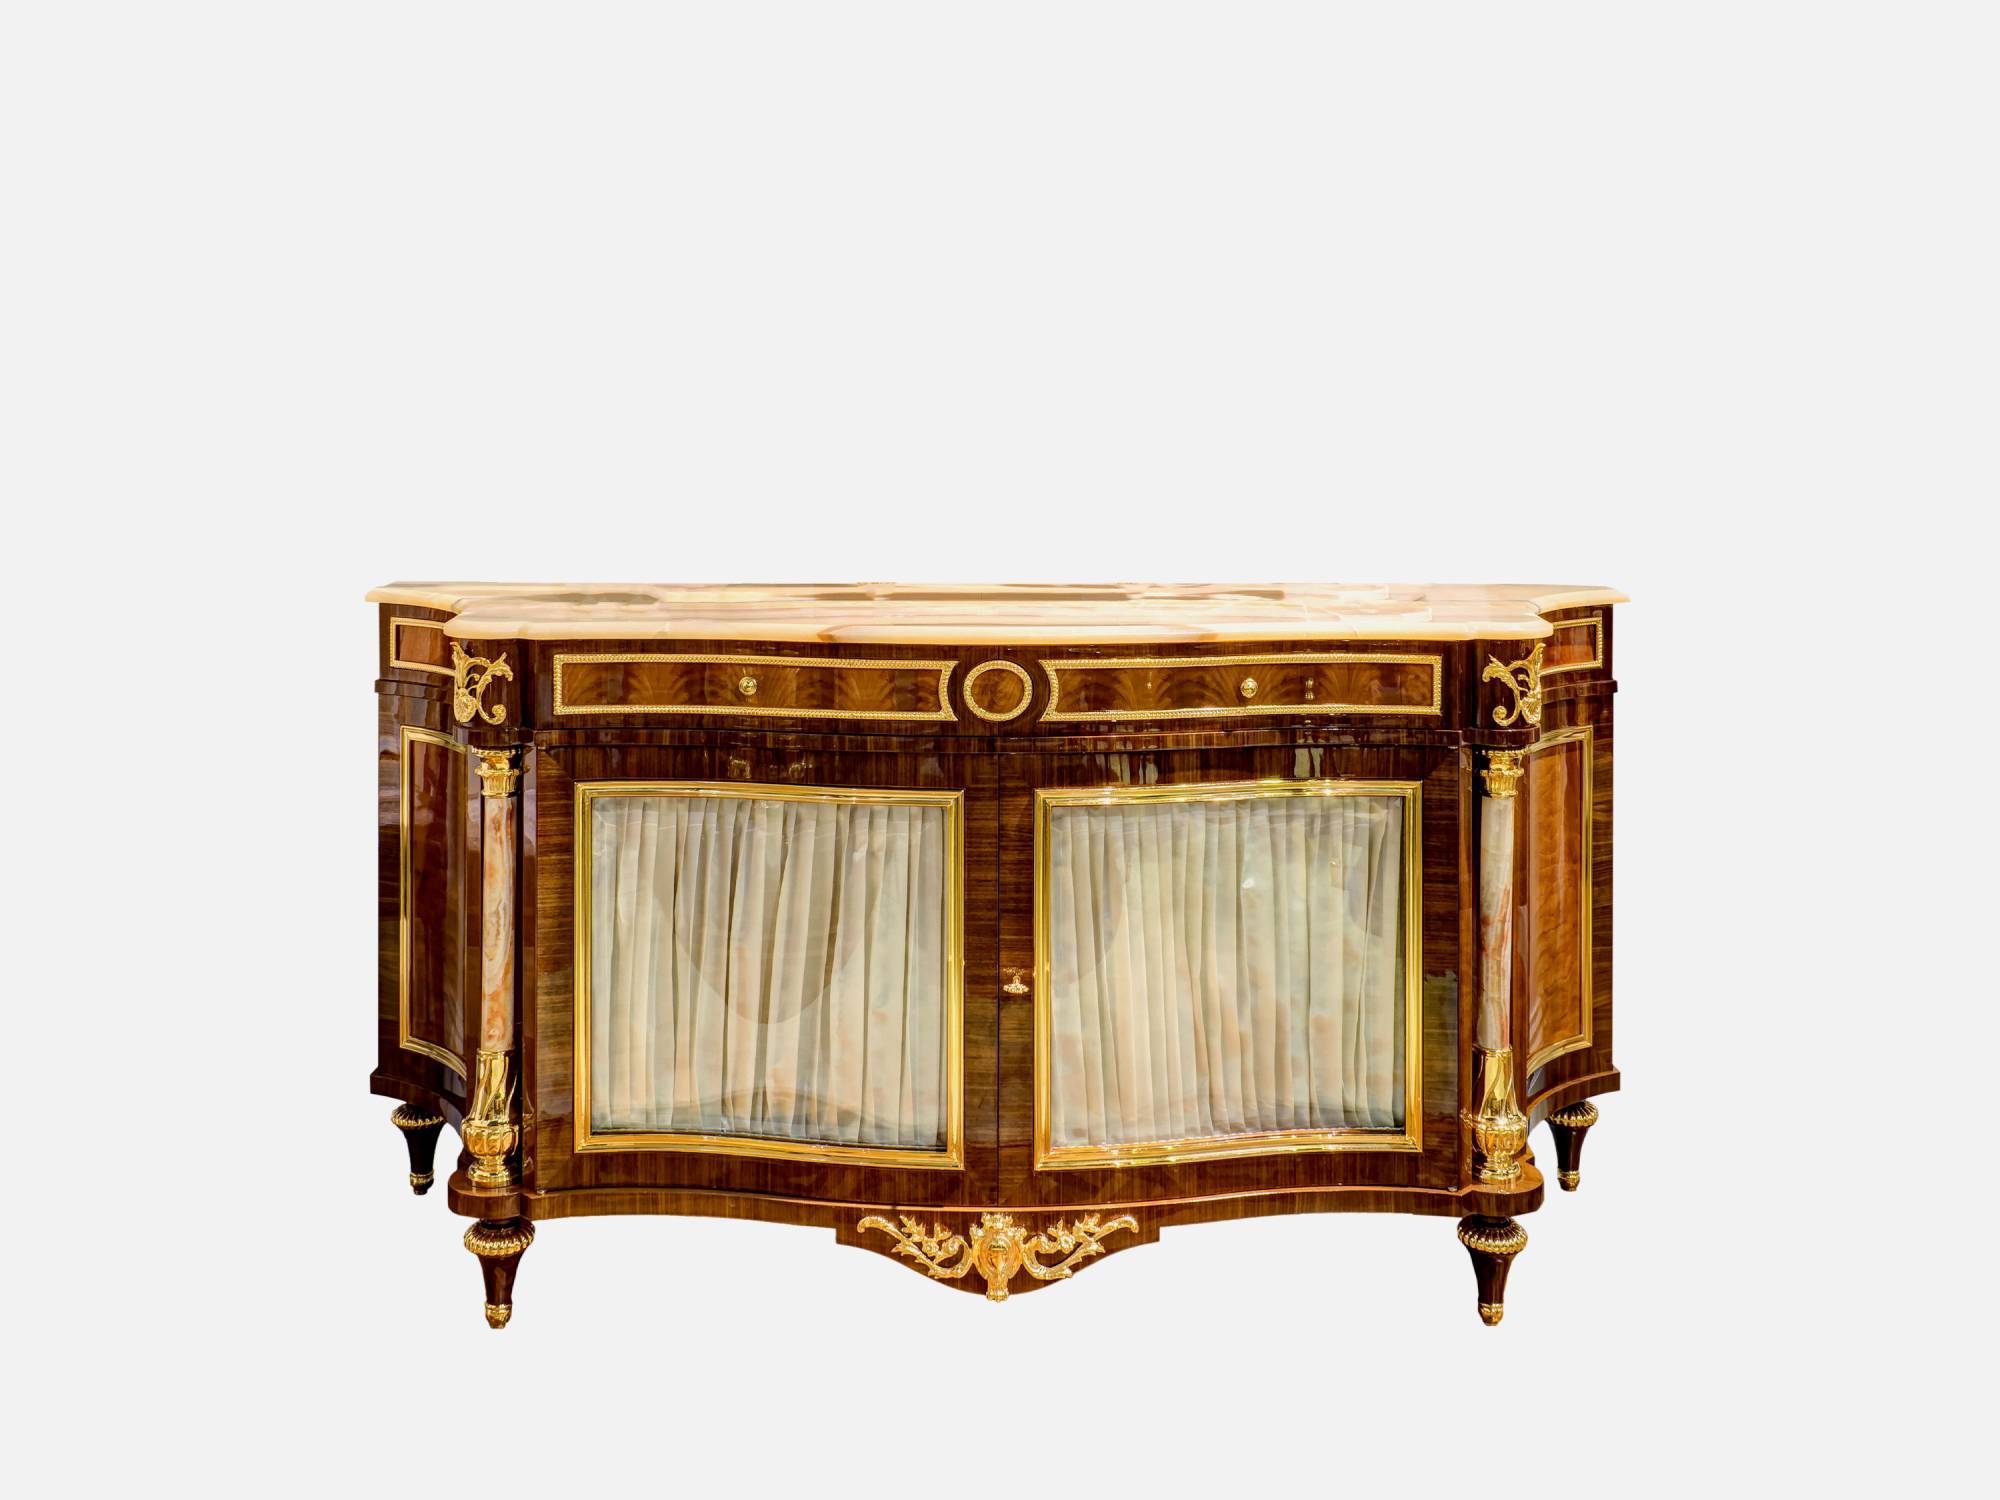 ART. 2073 – The elegance of luxury classic Sideboards made in Italy by C.G. Capelletti.